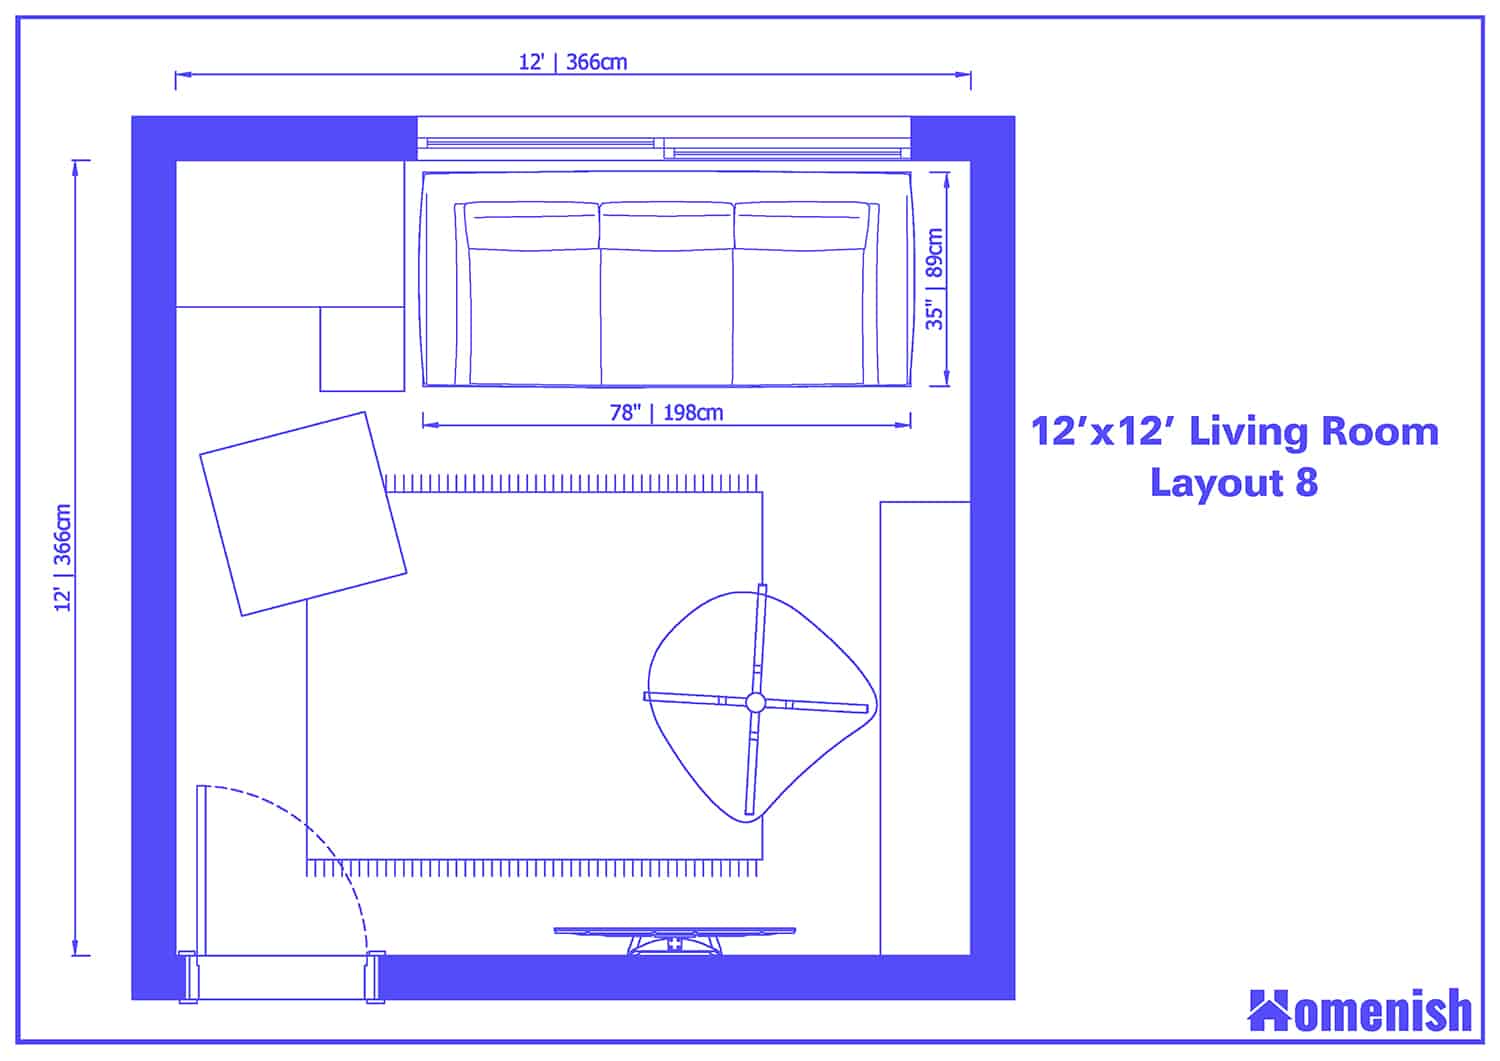 12' x 12' Living Room Layout 8